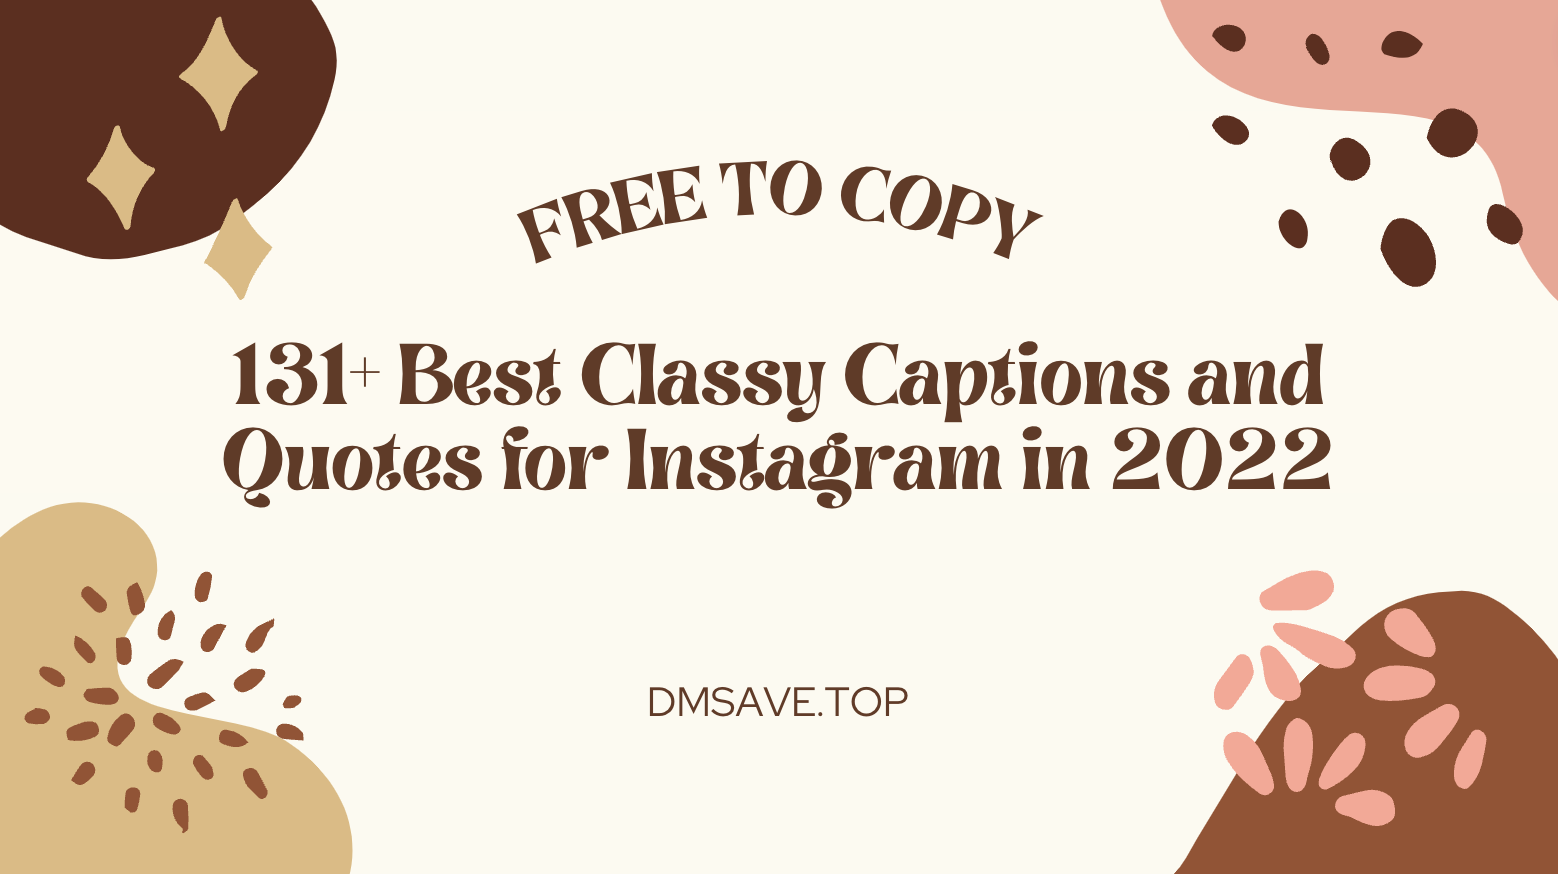 131+ Best Classy Captions and Quotes for Instagram in 2022 [Free to Copy]